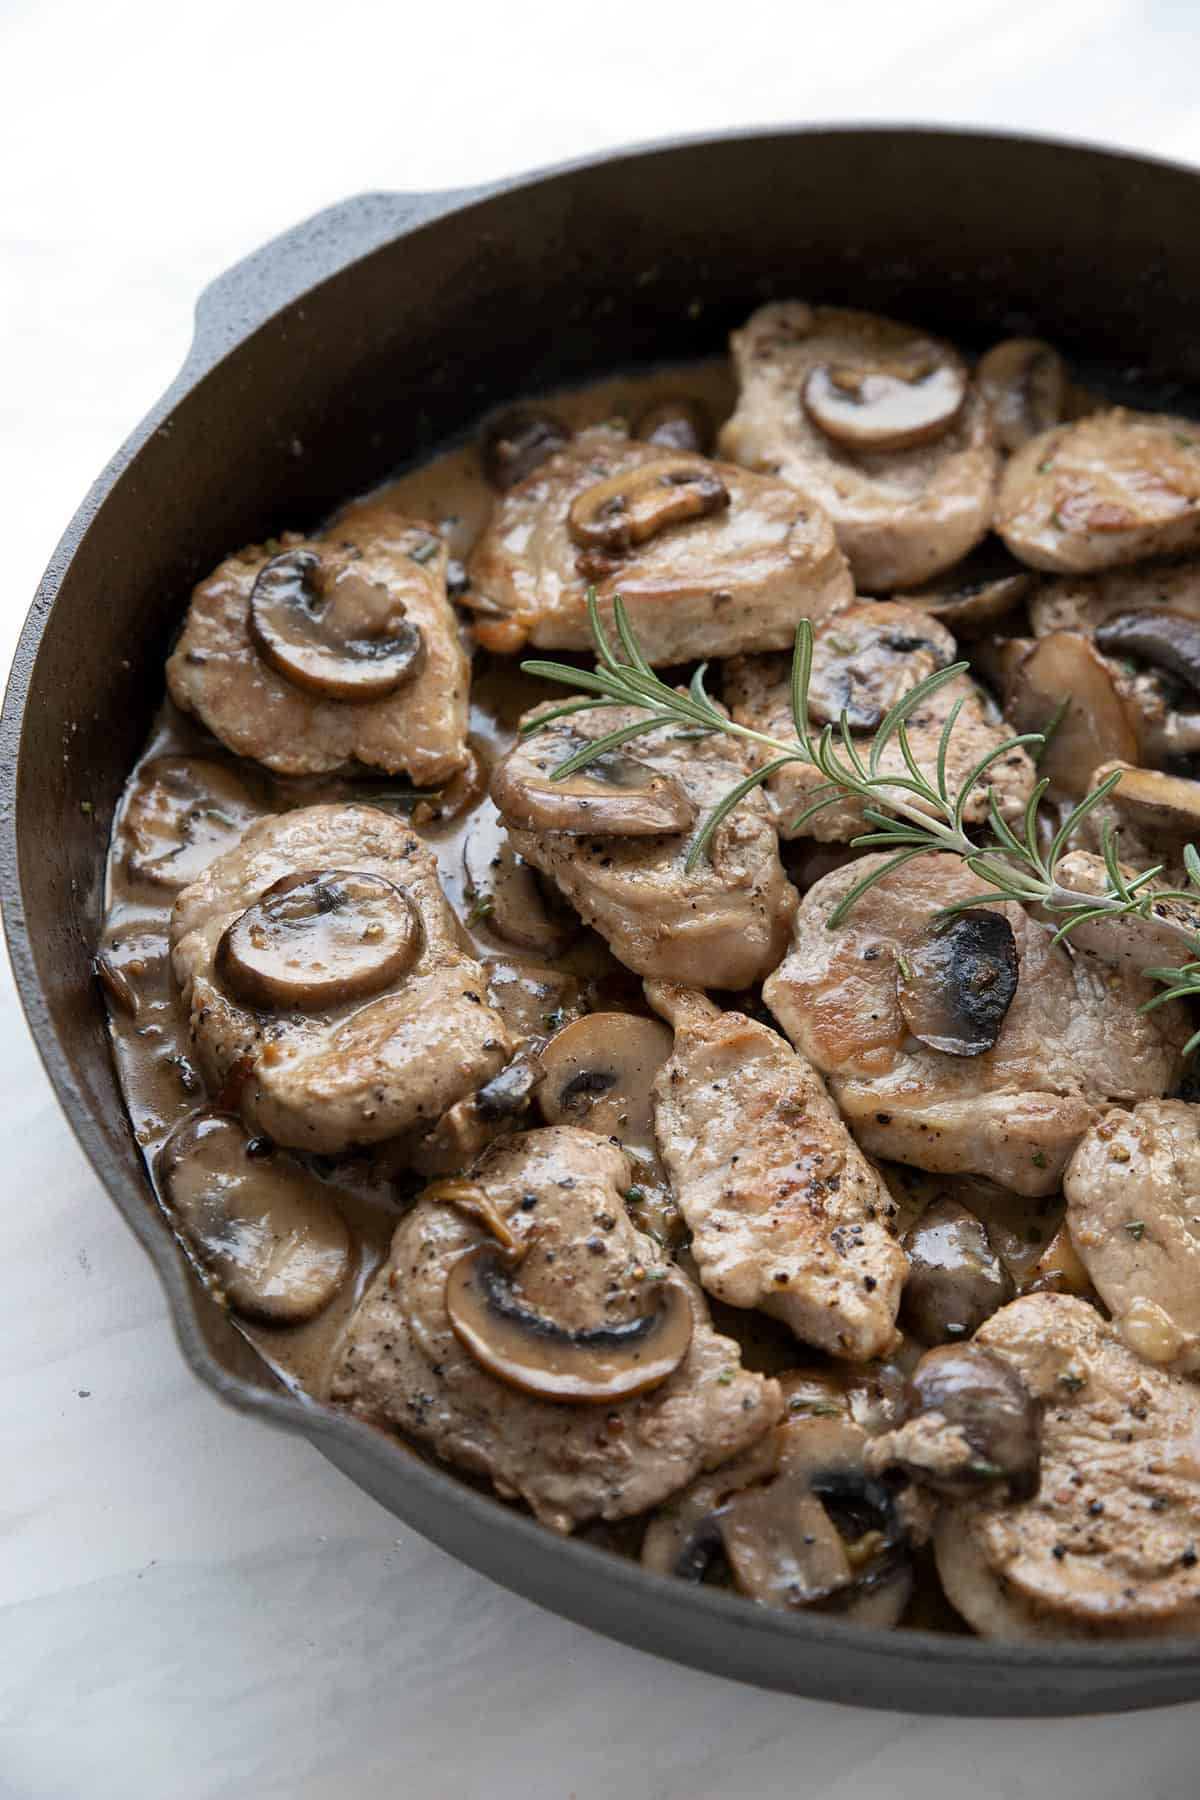 Pan seared pork medallions with creamy mushroom sauce in a cast iron skillet.